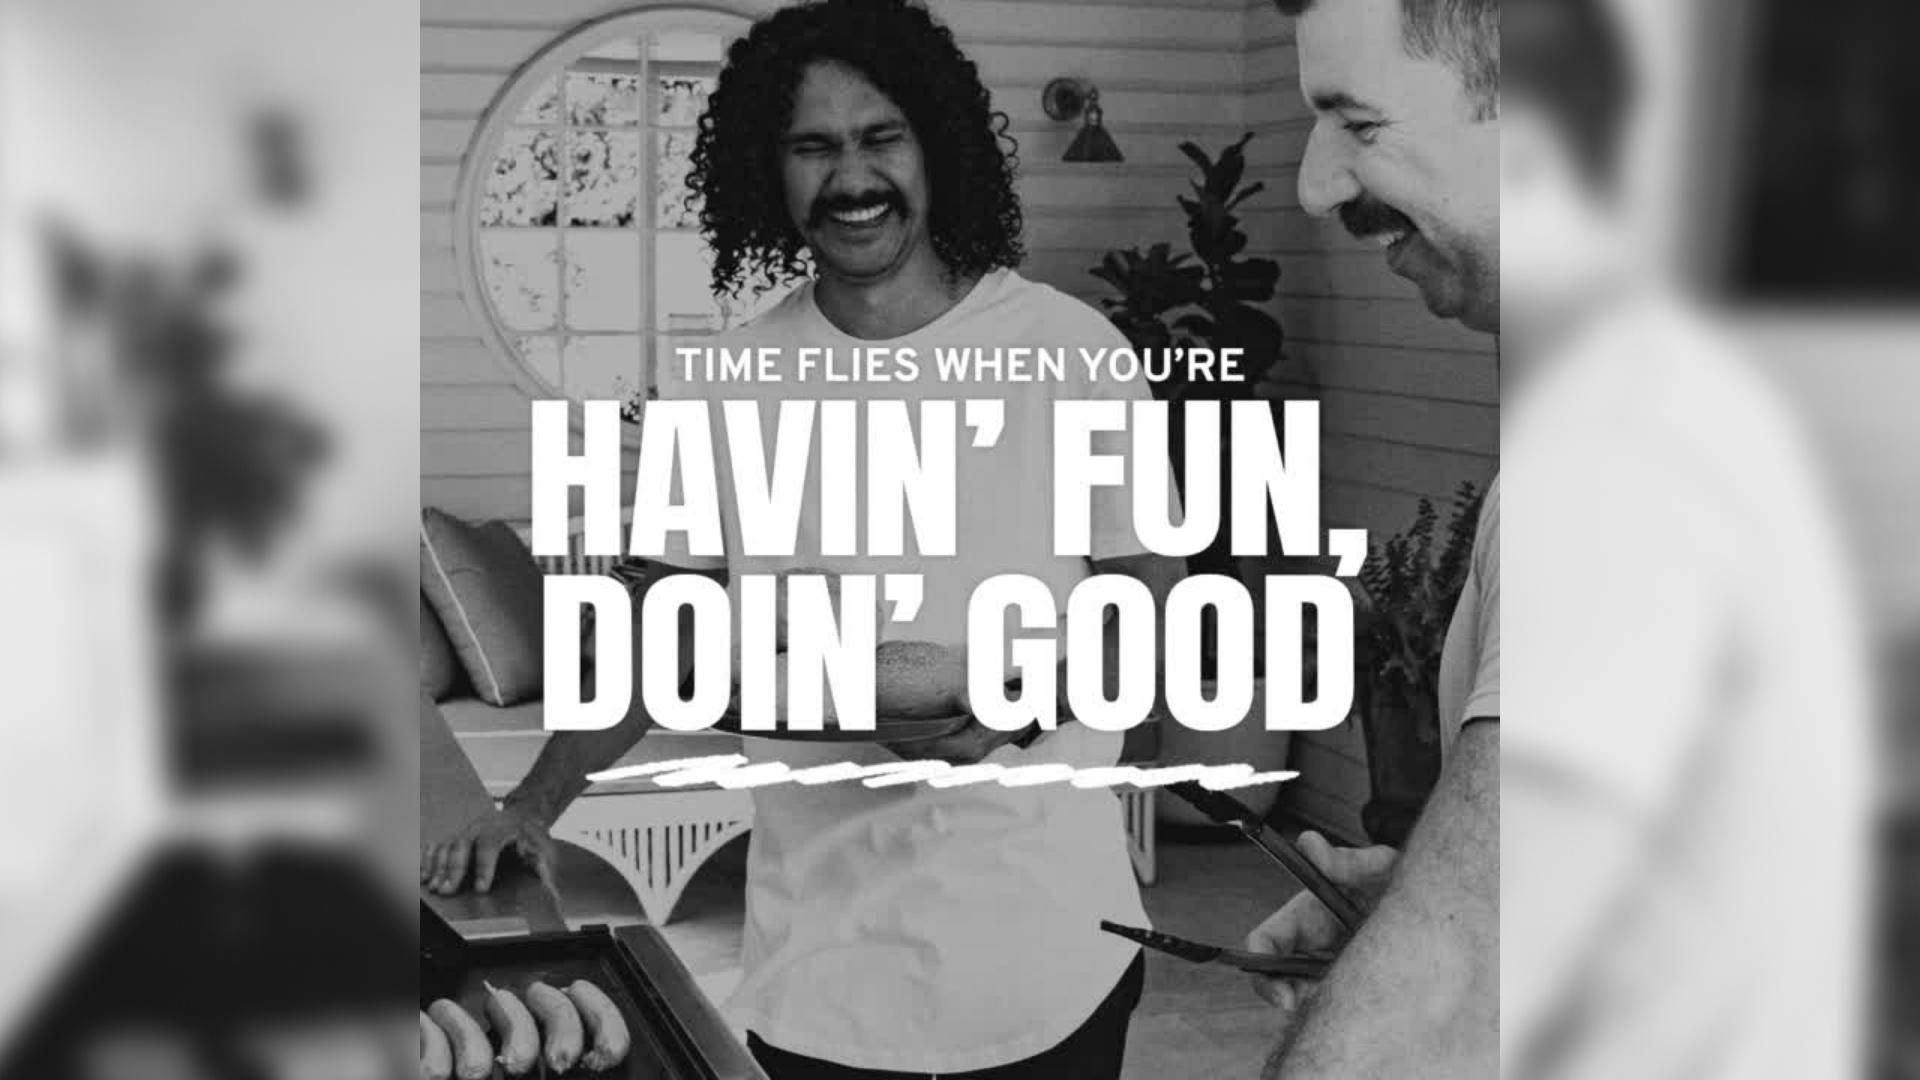 An image of two men at a BBQ with text overlay which says "Time flies when you're havin' fun, doin' good"